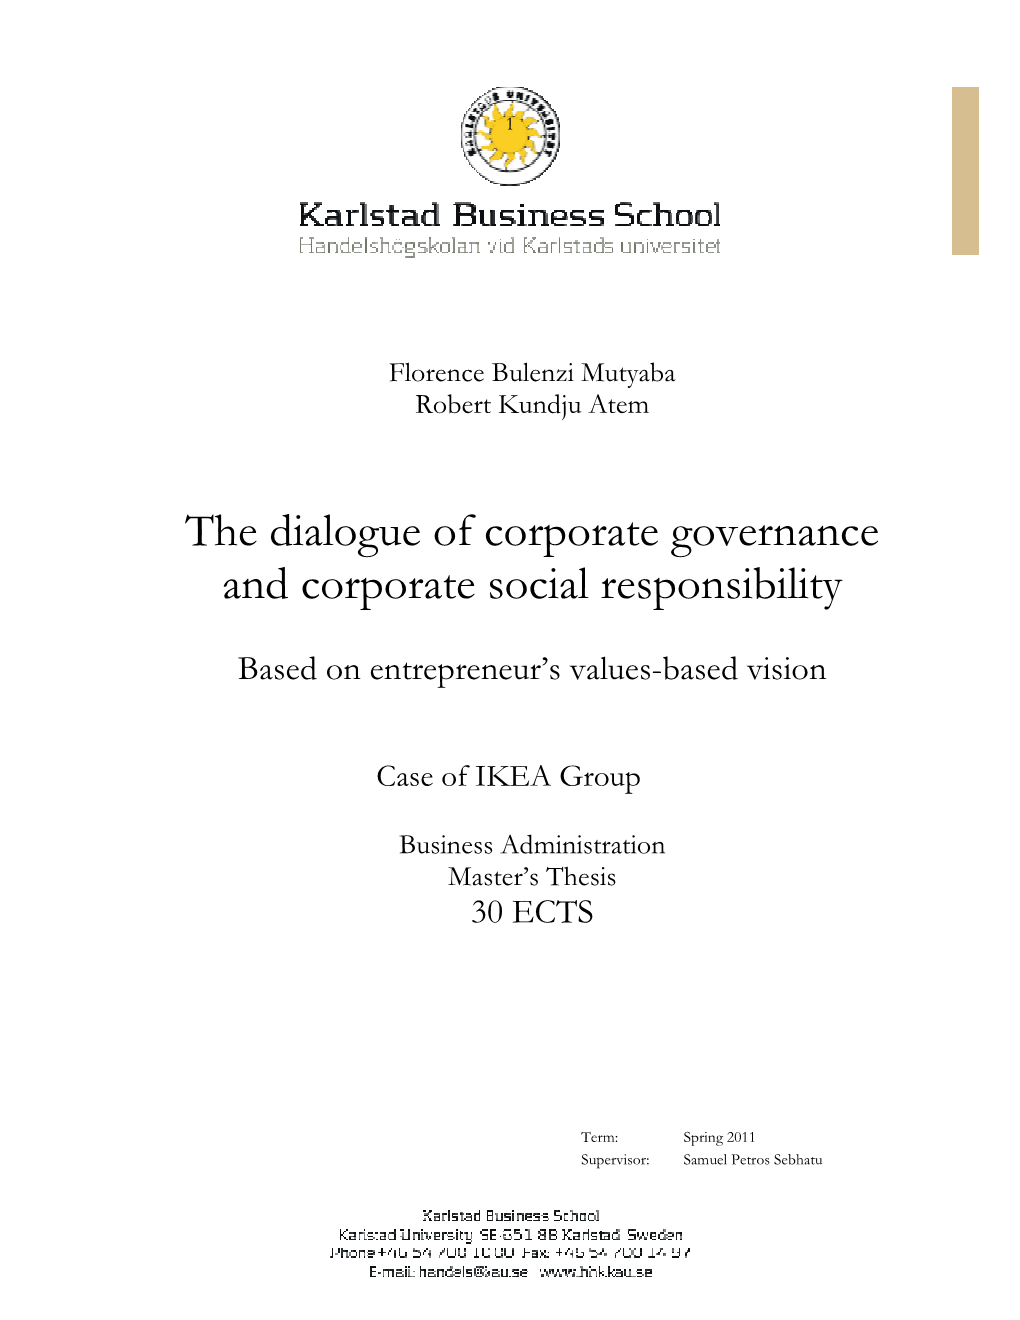 The Dialogue of Corporate Governance and Corporate Social Responsibility